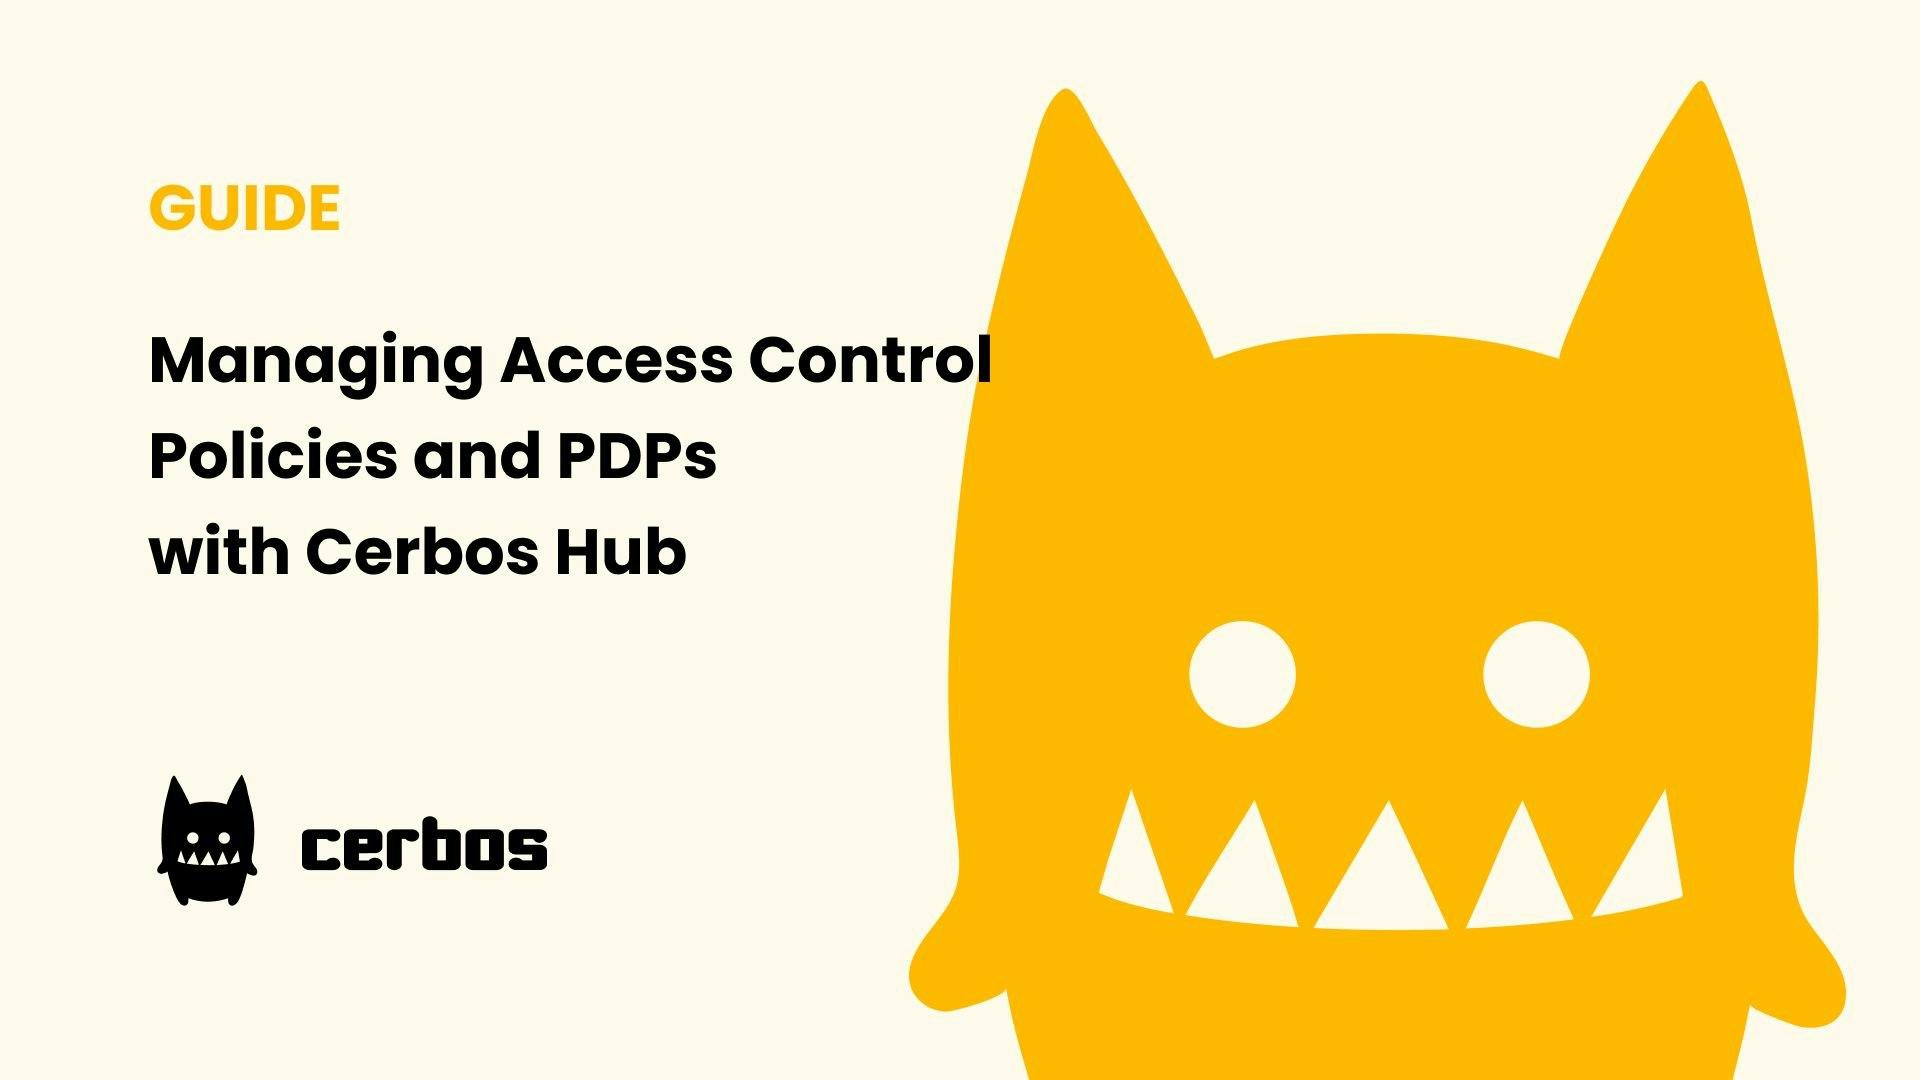 Managing access control policies and PDPs with Cerbos Hub